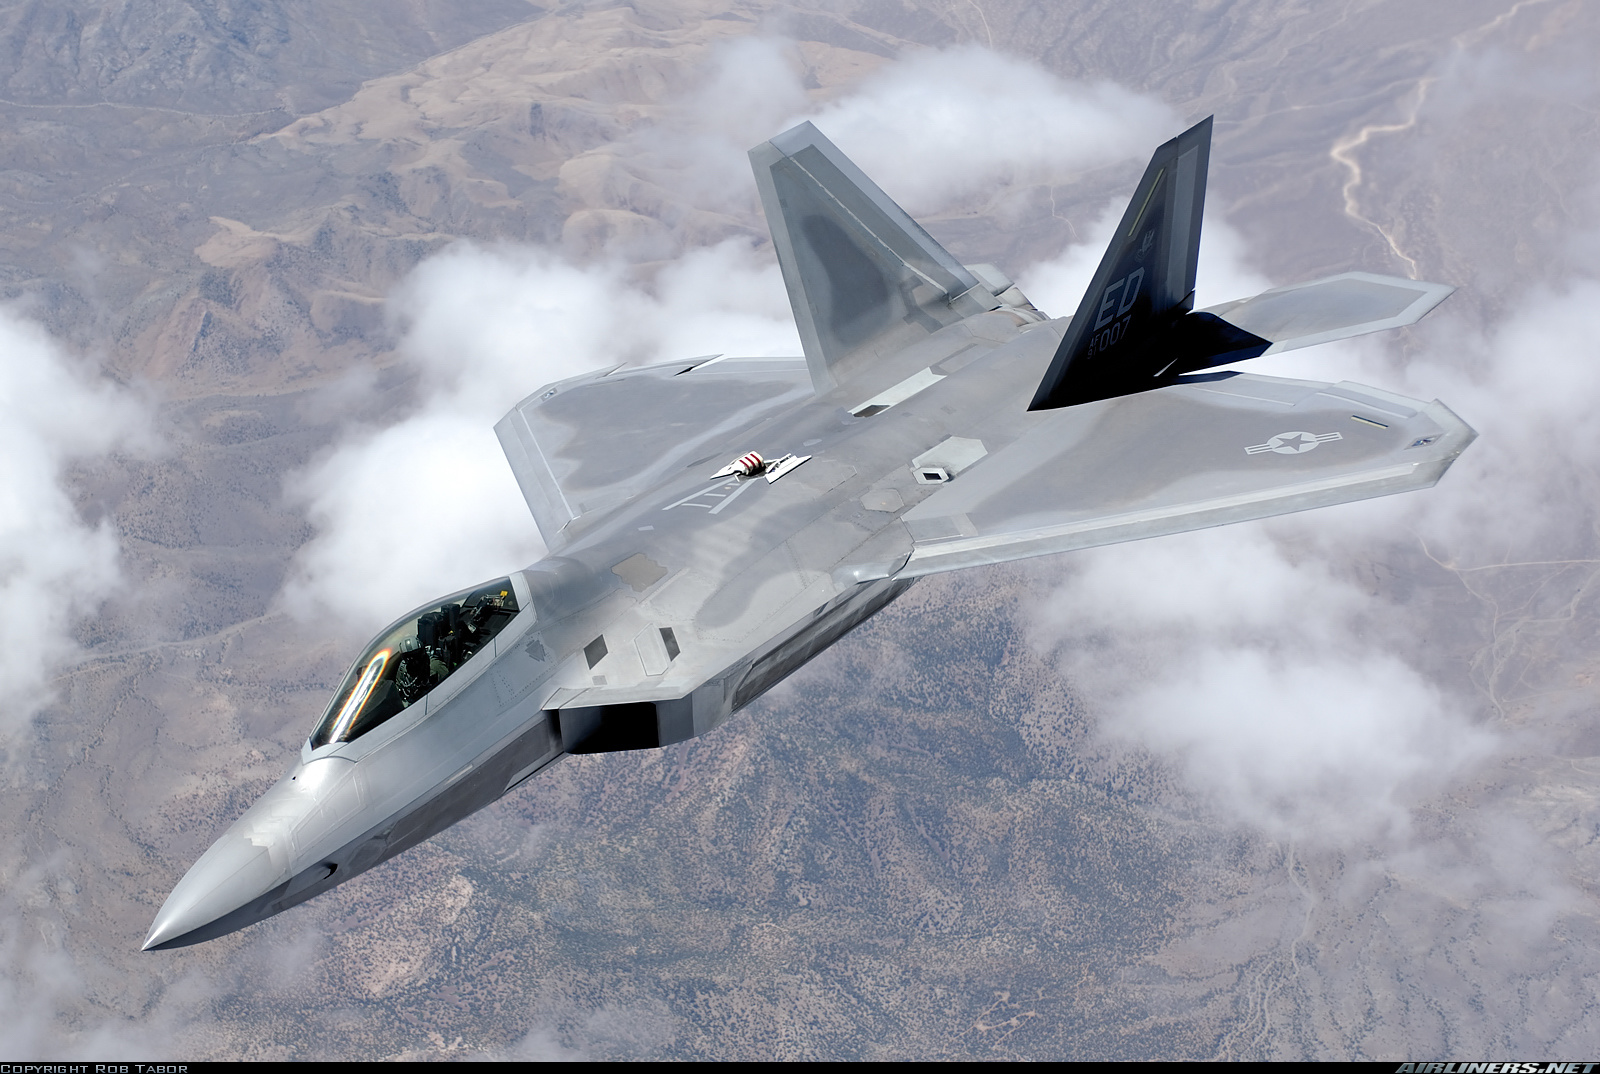 Lockheed Martin F-22A Raptor - Usa - Air Force | Aviation Photo #1221452 | Airliners.net